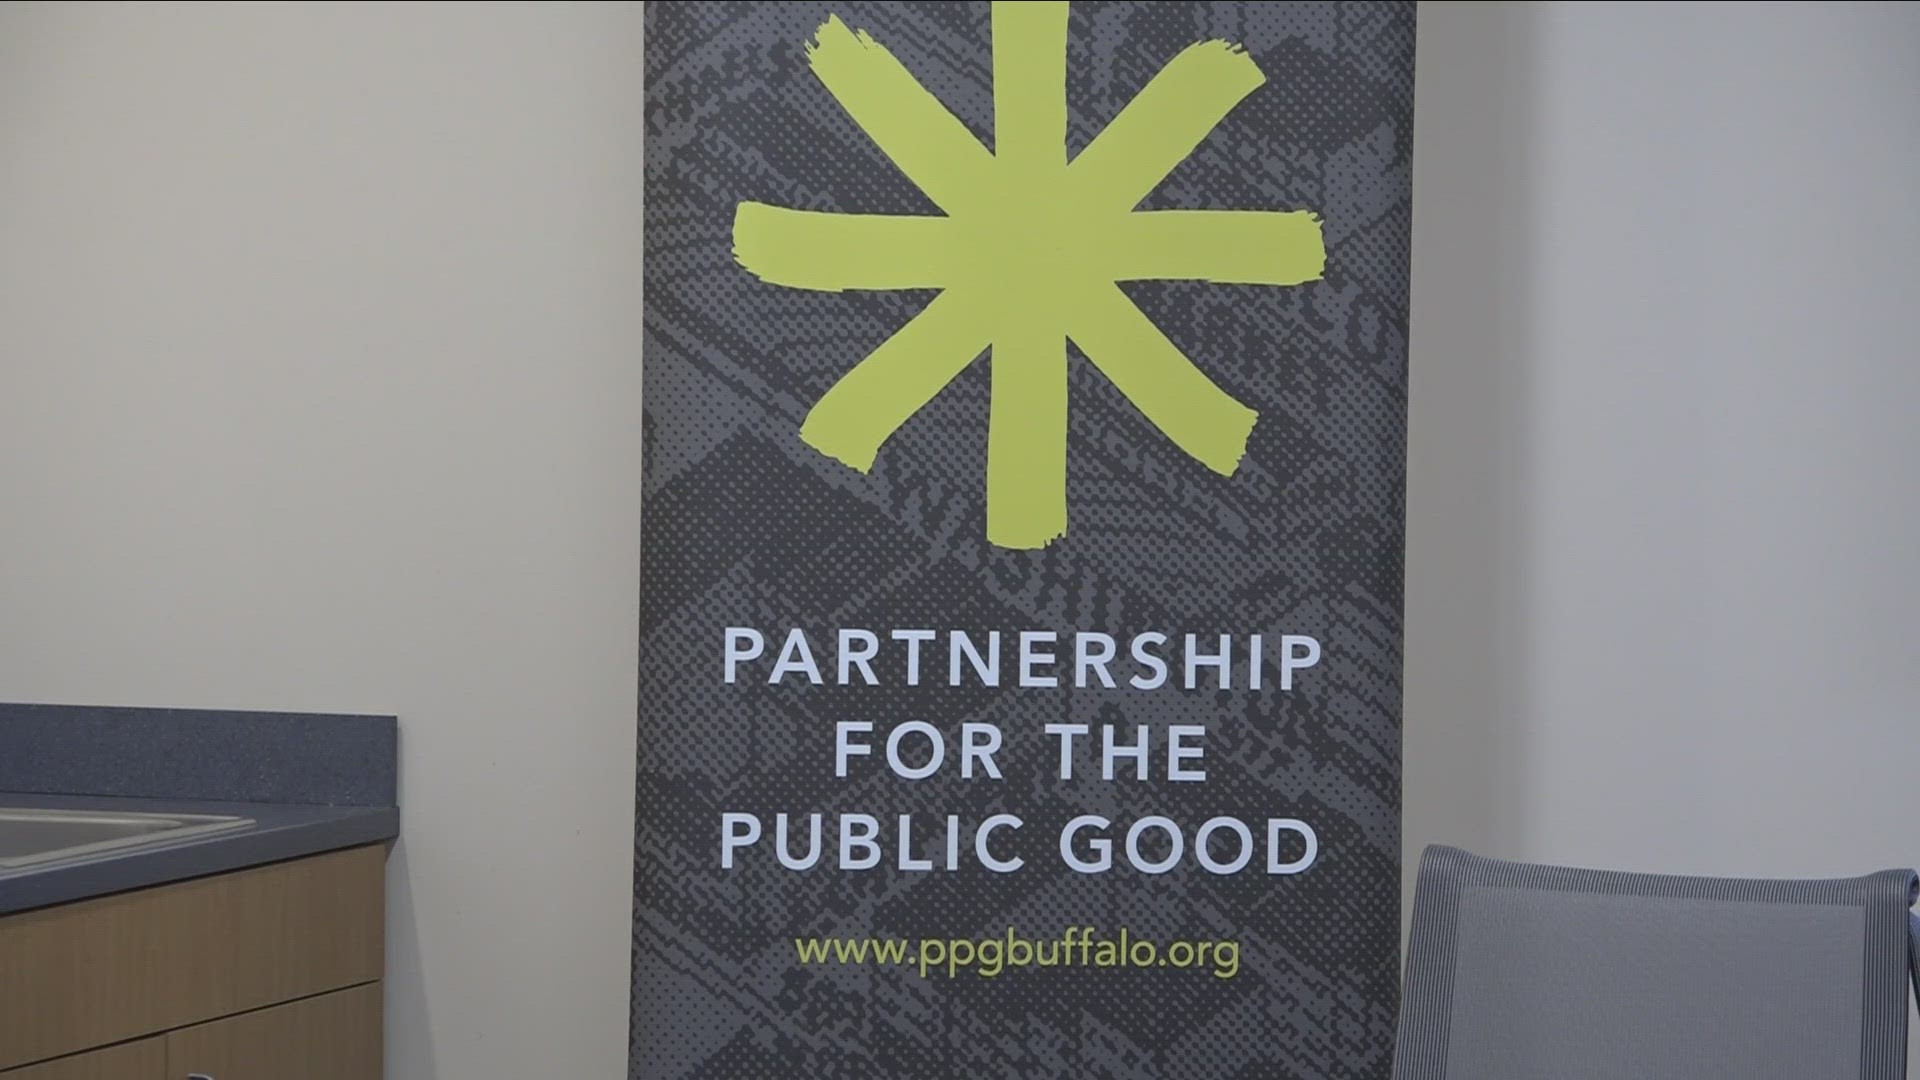 The Partnership for the Public Good held a press conference to ask the Common Council to table a vote on allocating $60 million to revenue replacement.